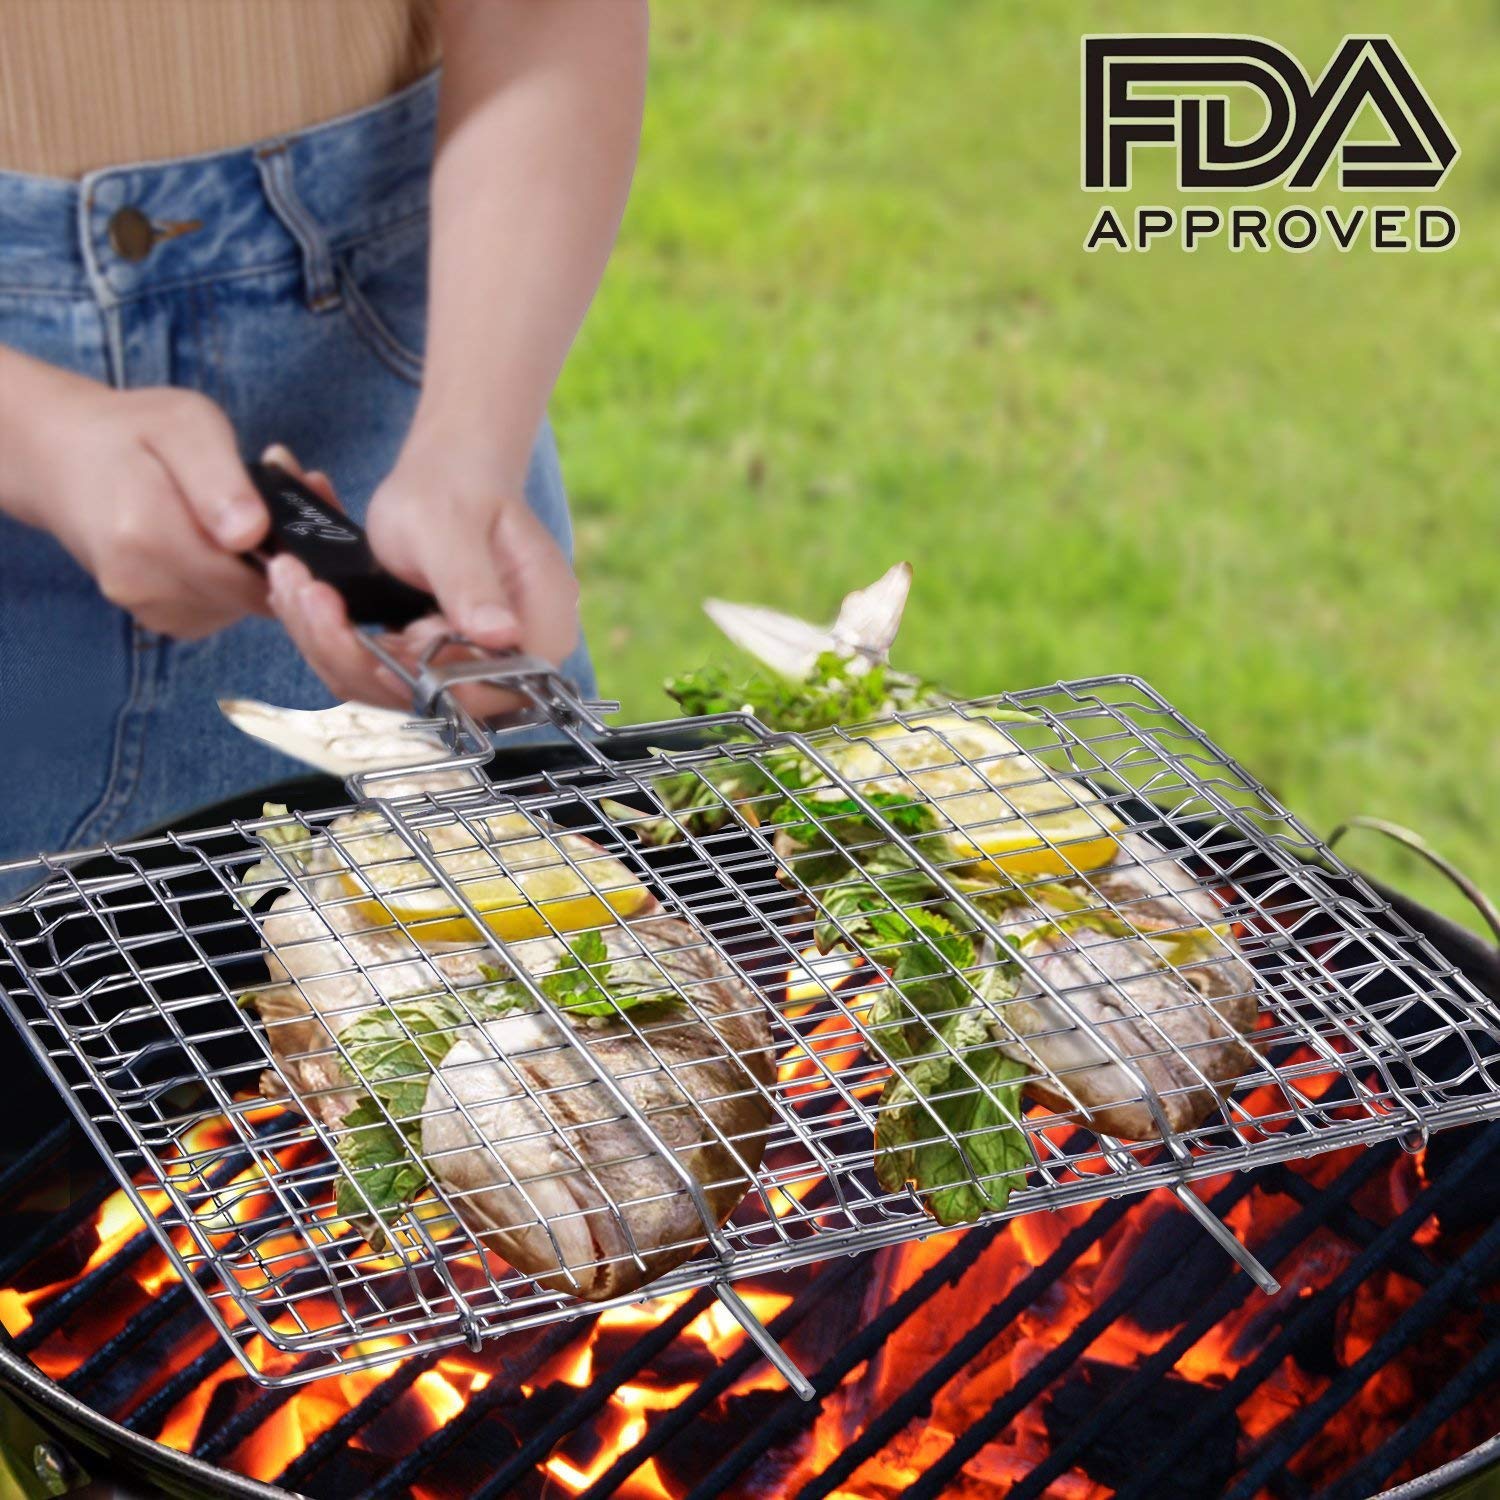 Take 40 Percent Off This Grilling Basket And Get It For Under $20 | The ...